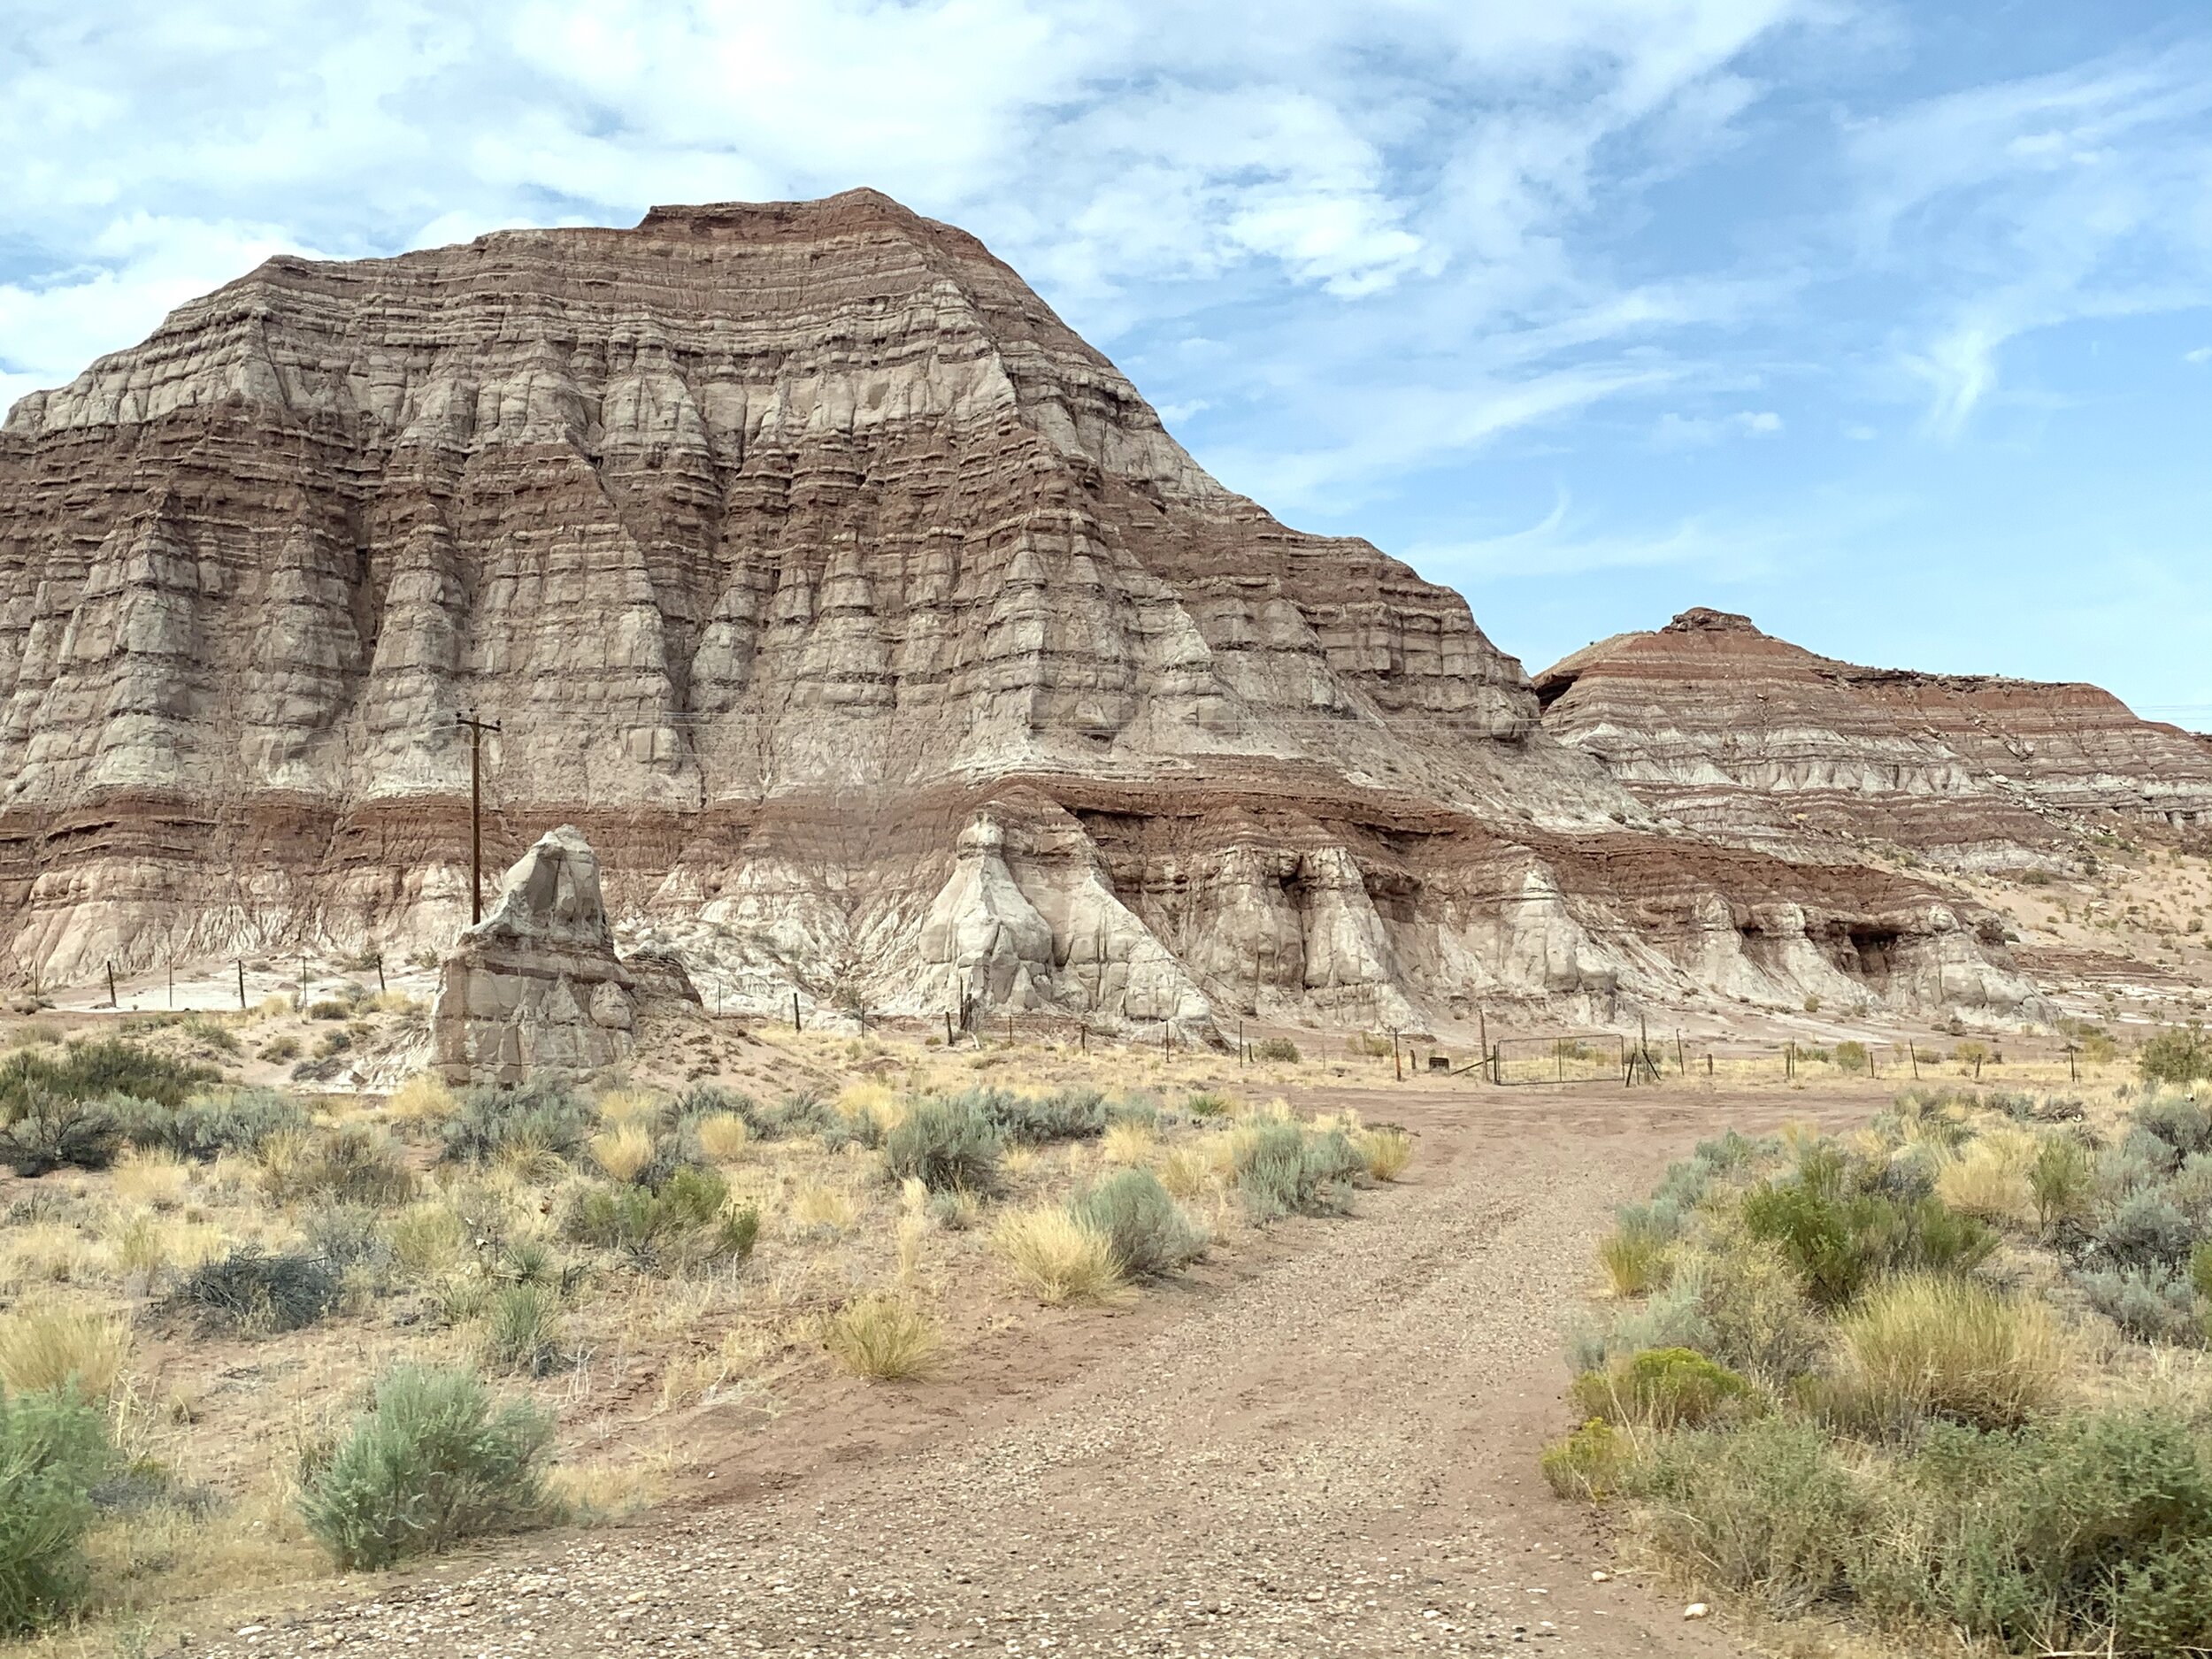  We drove along the fringes of  Grand Staircase-Escalante National Monument in southern Utah  while en route to our next destination. We didn’t get to see some of the more popular attractions here, but we highly recommend looking it up and visiting t